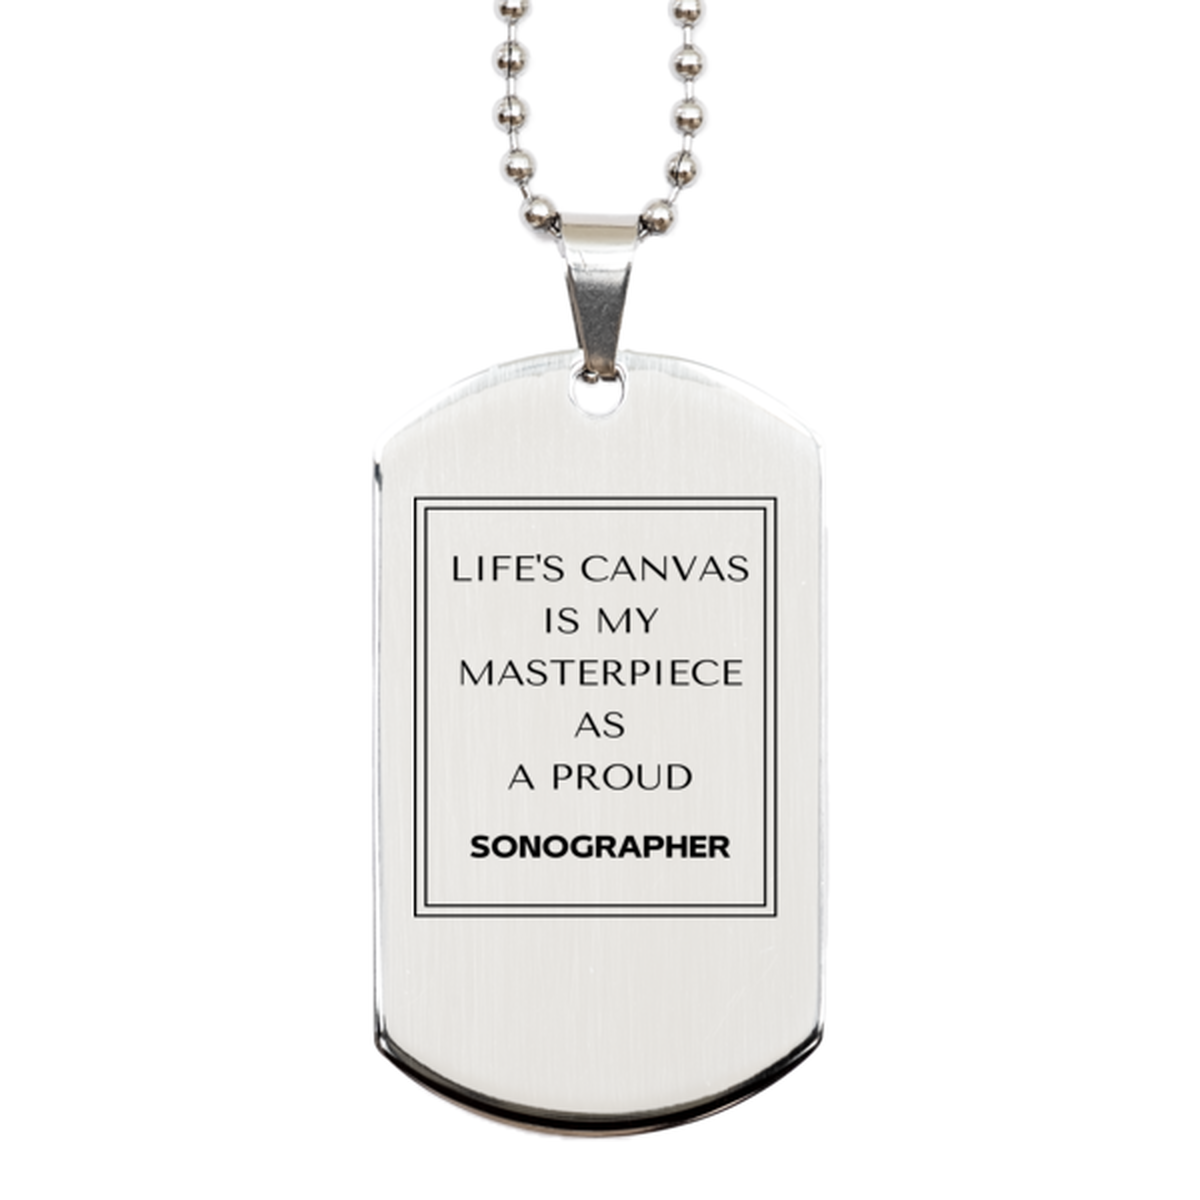 Proud Sonographer Gifts, Life's canvas is my masterpiece, Epic Birthday Christmas Unique Silver Dog Tag For Sonographer, Coworkers, Men, Women, Friends